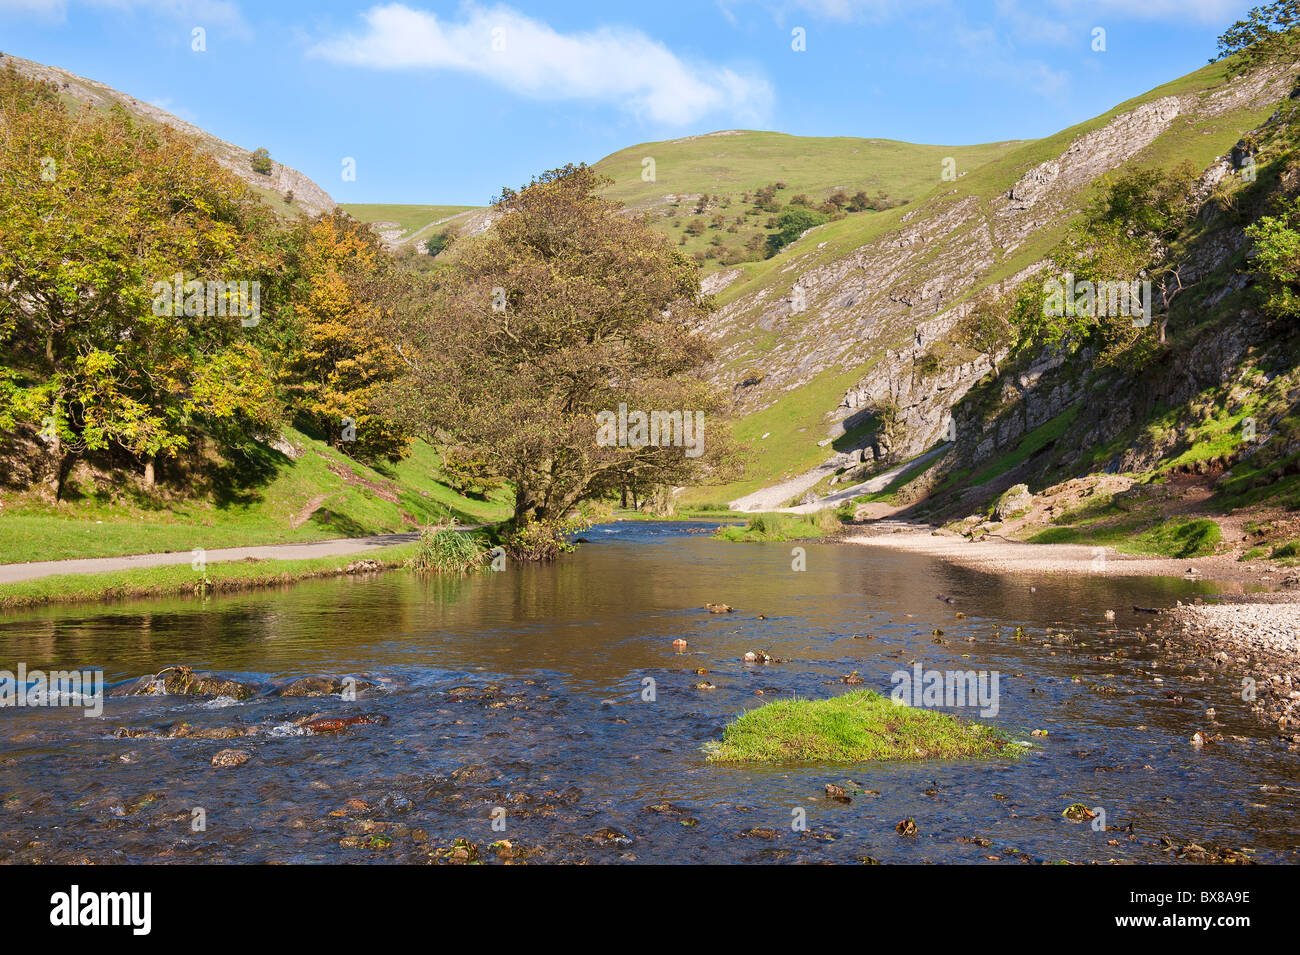 Dovedale in the Peak District, Derbyshire, England is a wonderful area for walking. Trout fish can be caught in the river. Stock Photo